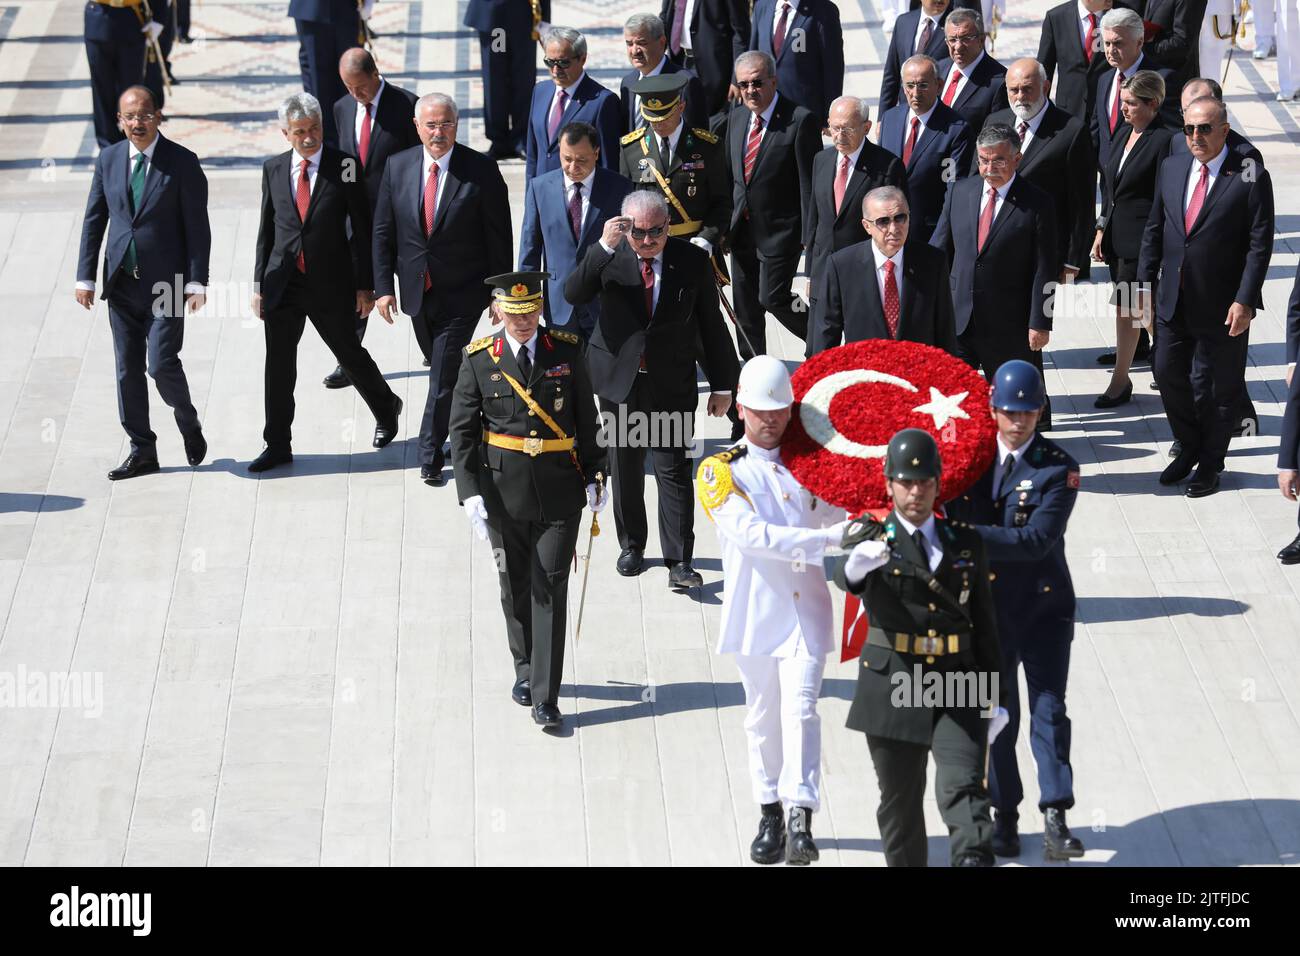 Ankara, Turkey, 30/08/2022, President of the Republic of Turkey, Recep Tayyip Erdo?an and the military and civilian delegation laid a wreath on Atatürk's grave. Victory Day is an official and national holiday celebrated in Turkey and the Turkish Republic of Northern Cyprus every year on 30 August to commemorate the Great Offensive, which ended in victory in Dumlup?nar under the command of Atatürk on August 30, 1922. On the anniversary of the victory, President of the Republic of Turkey Recep Tayyip Erdo?an and the public visited the mausoleum where Atatürk's grave is located. Stock Photo